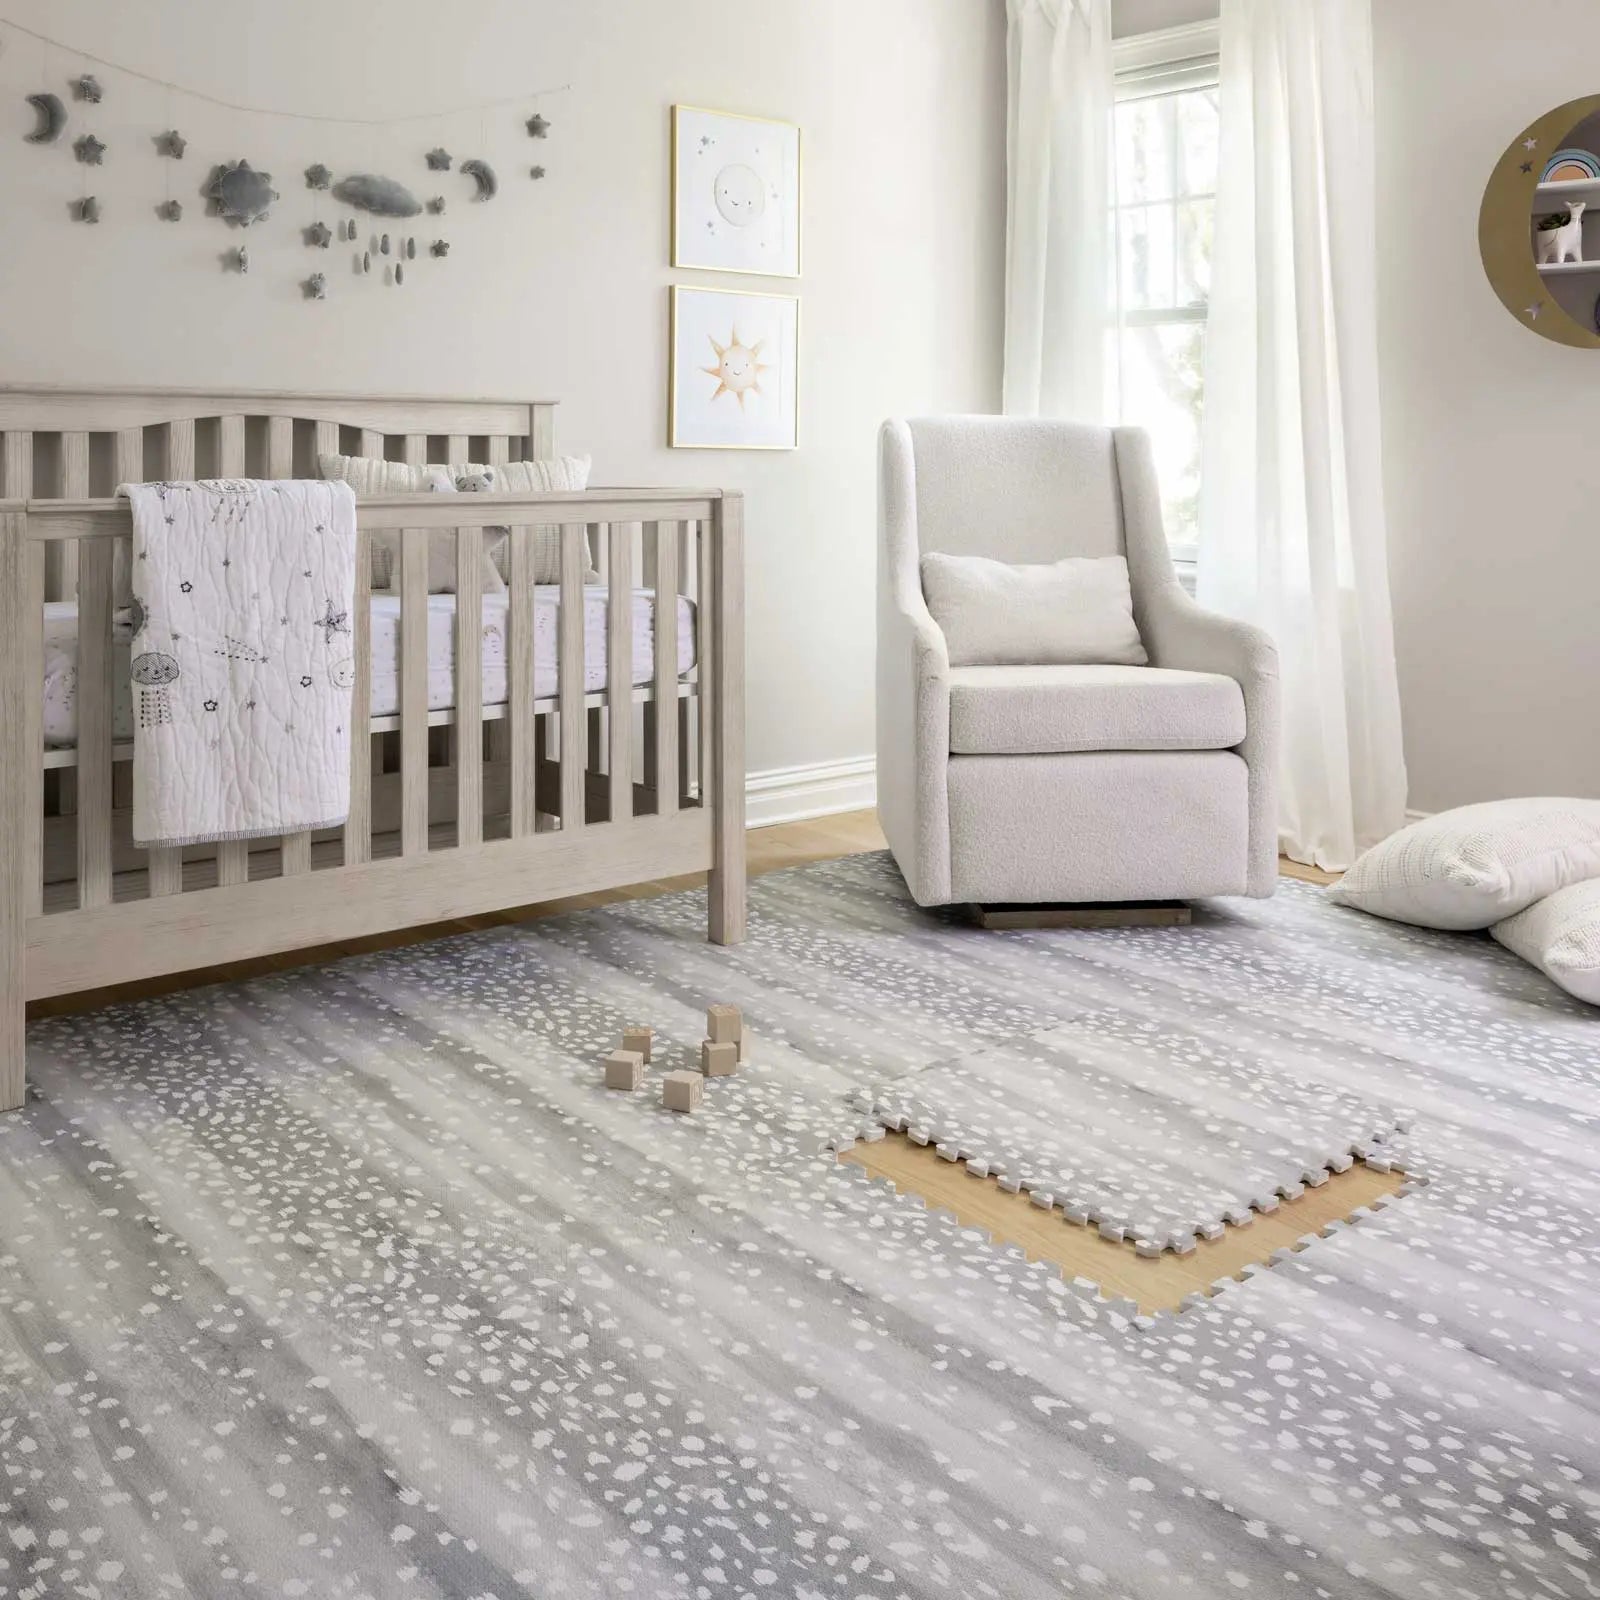 Fawn silver gray animal print play mat shown in nursery with one tile exposed